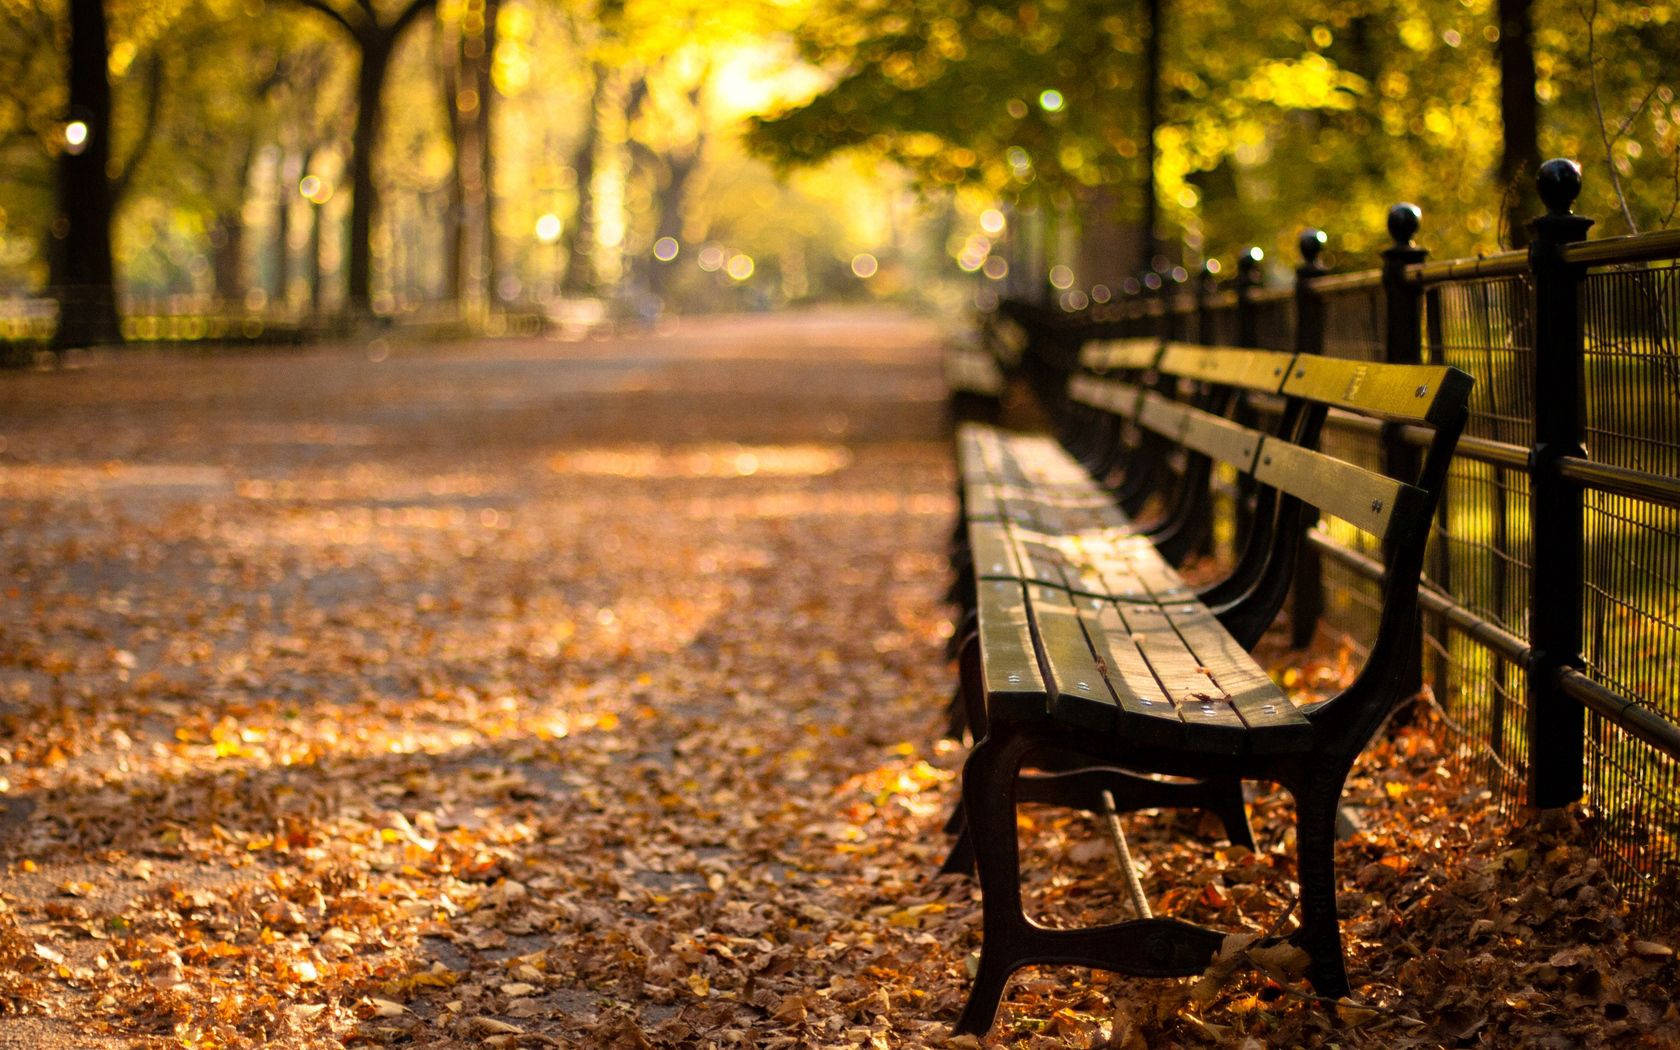 A Bench in Central Park, New York City Wallpaper